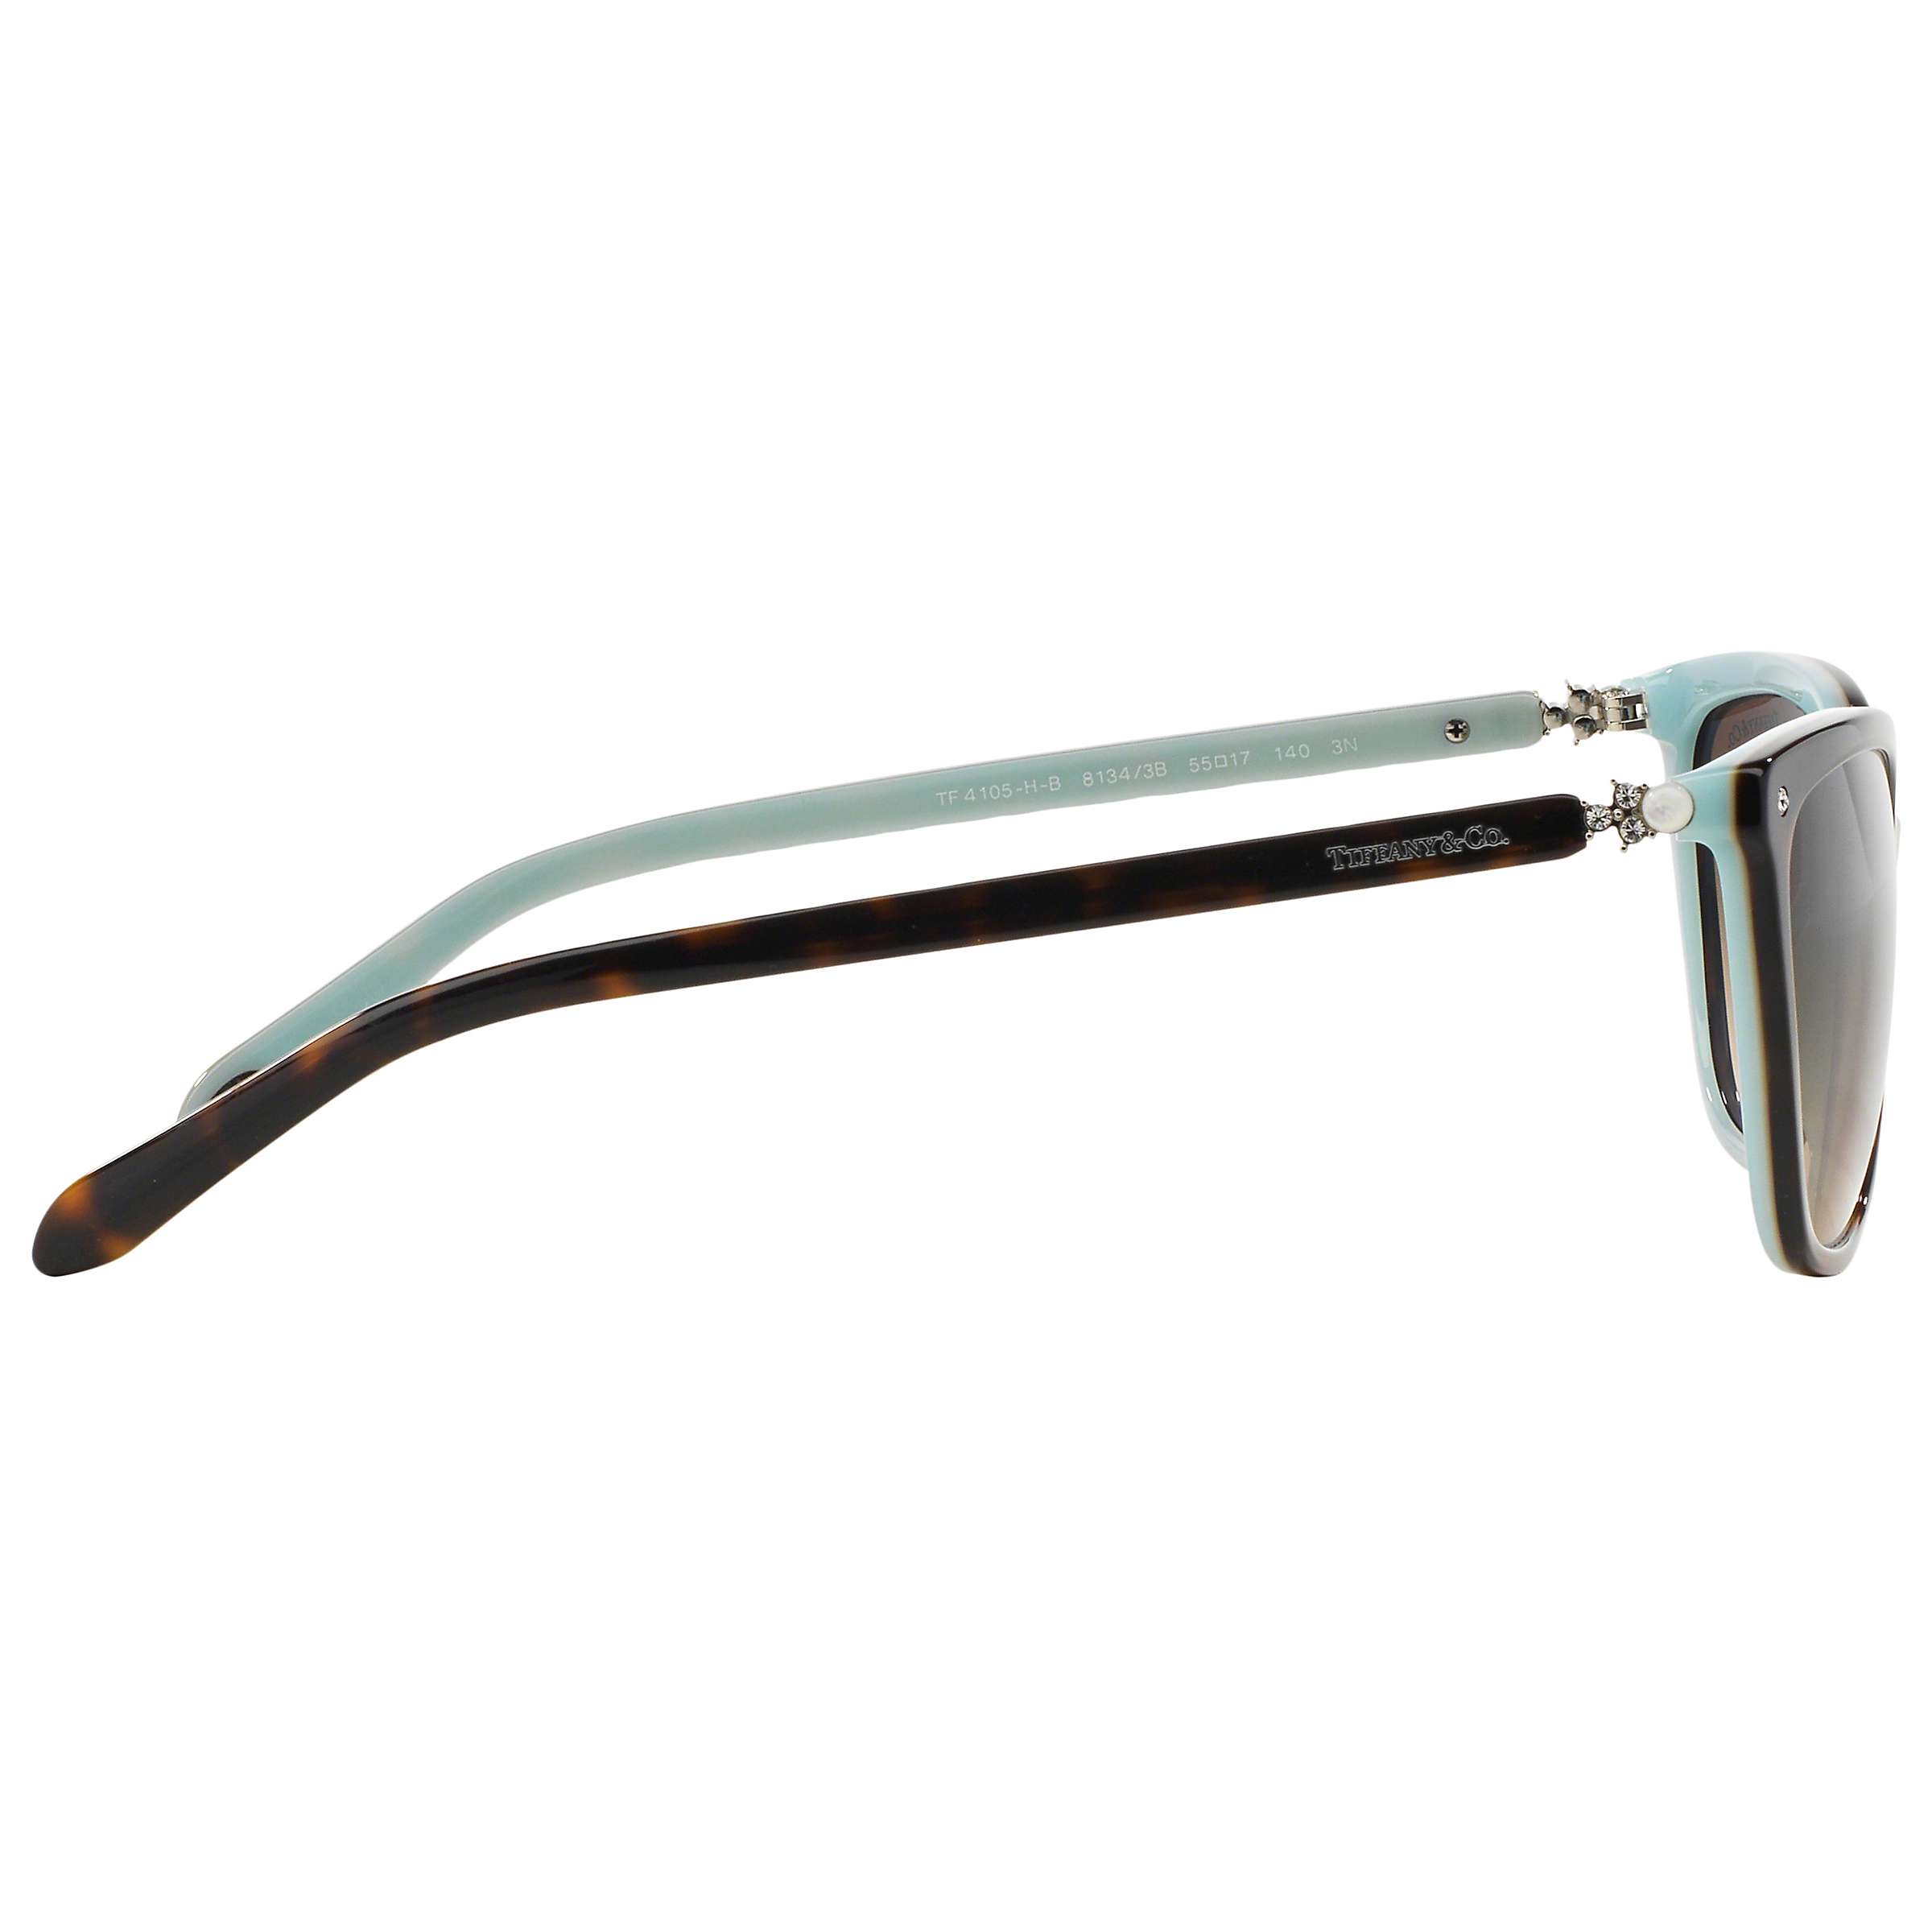 Buy Tiffany & Co TF4105HB Square Sunglasses Online at johnlewis.com